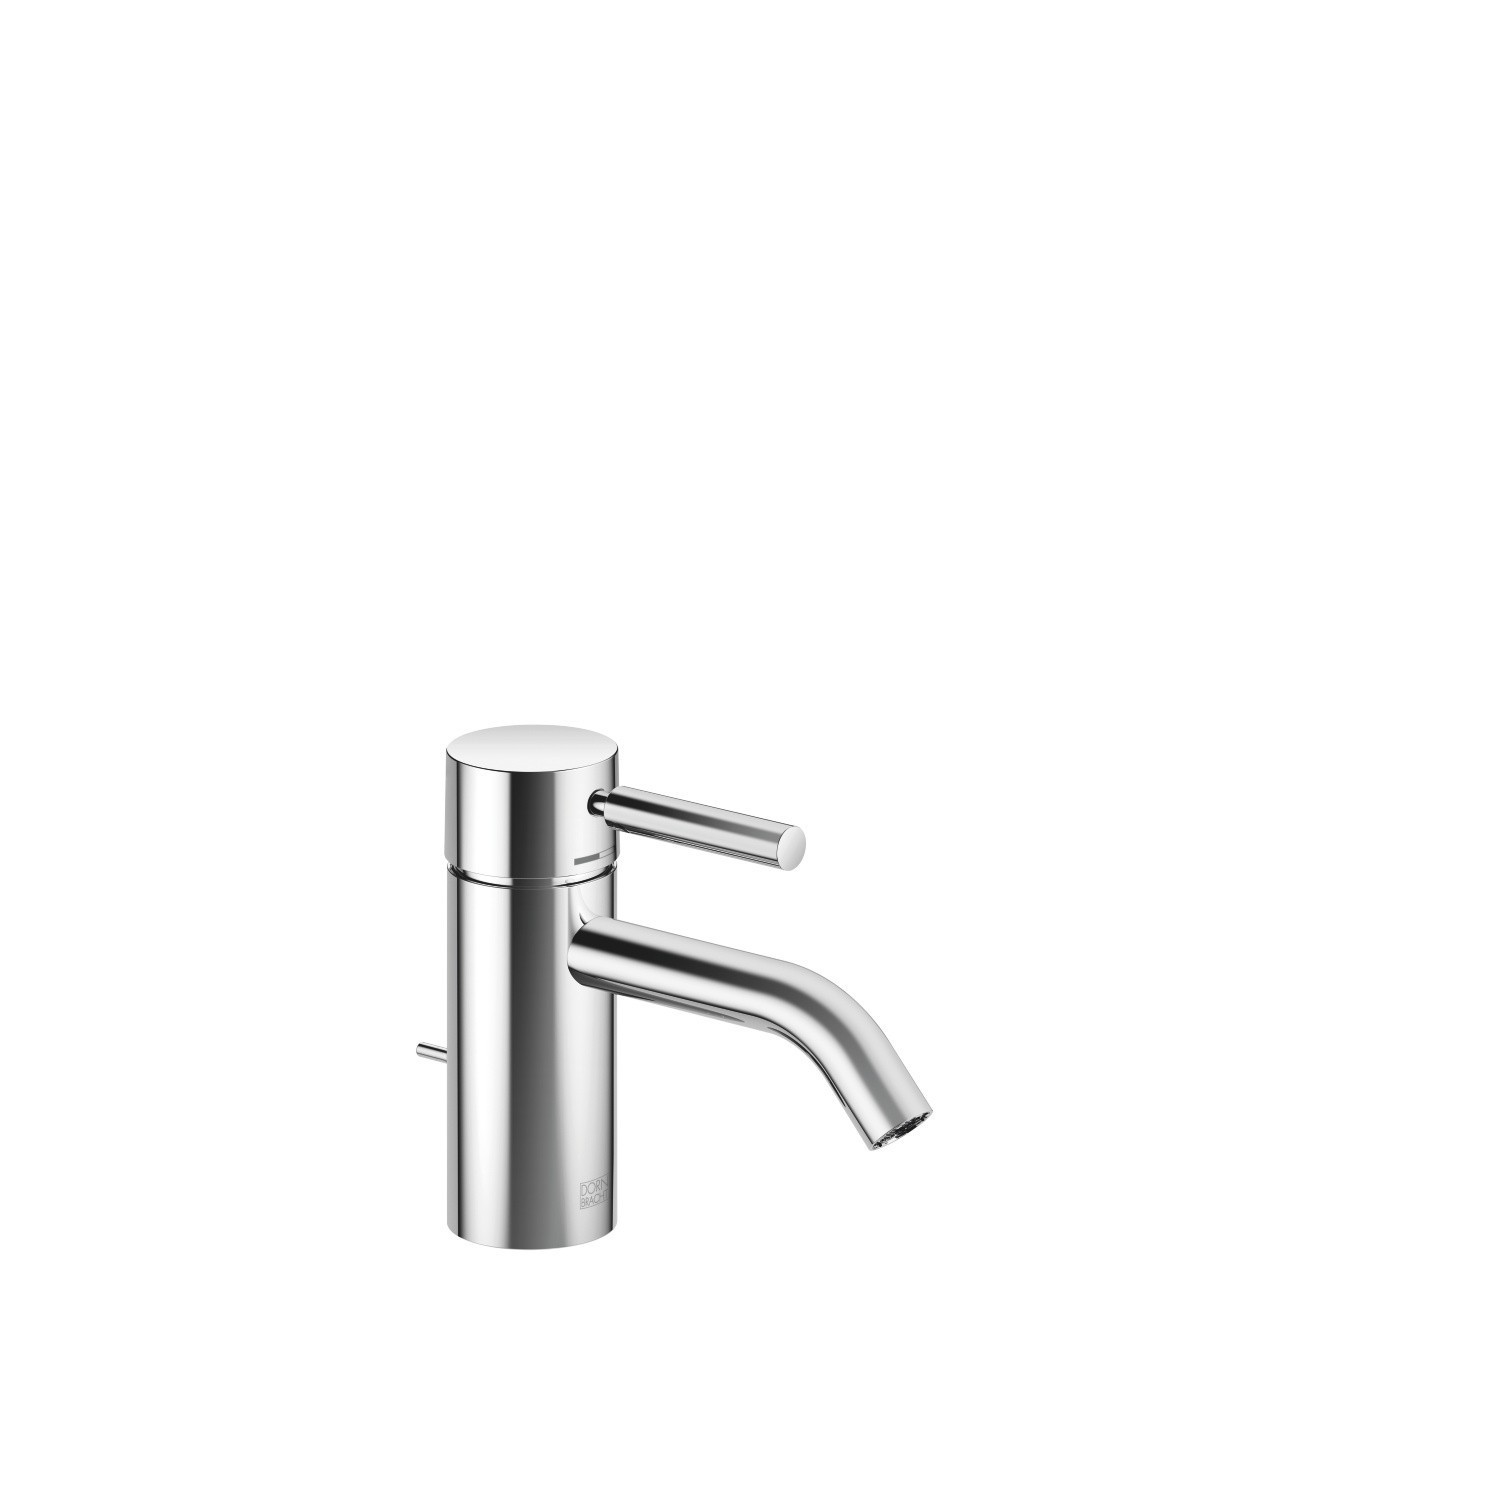 DORNBRACHT 33501660-0010 META 5 1/4 INCH SINGLE HOLE DECK MOUNT LAVATORY MIXER WITH DRAIN AND LEVER HANDLE